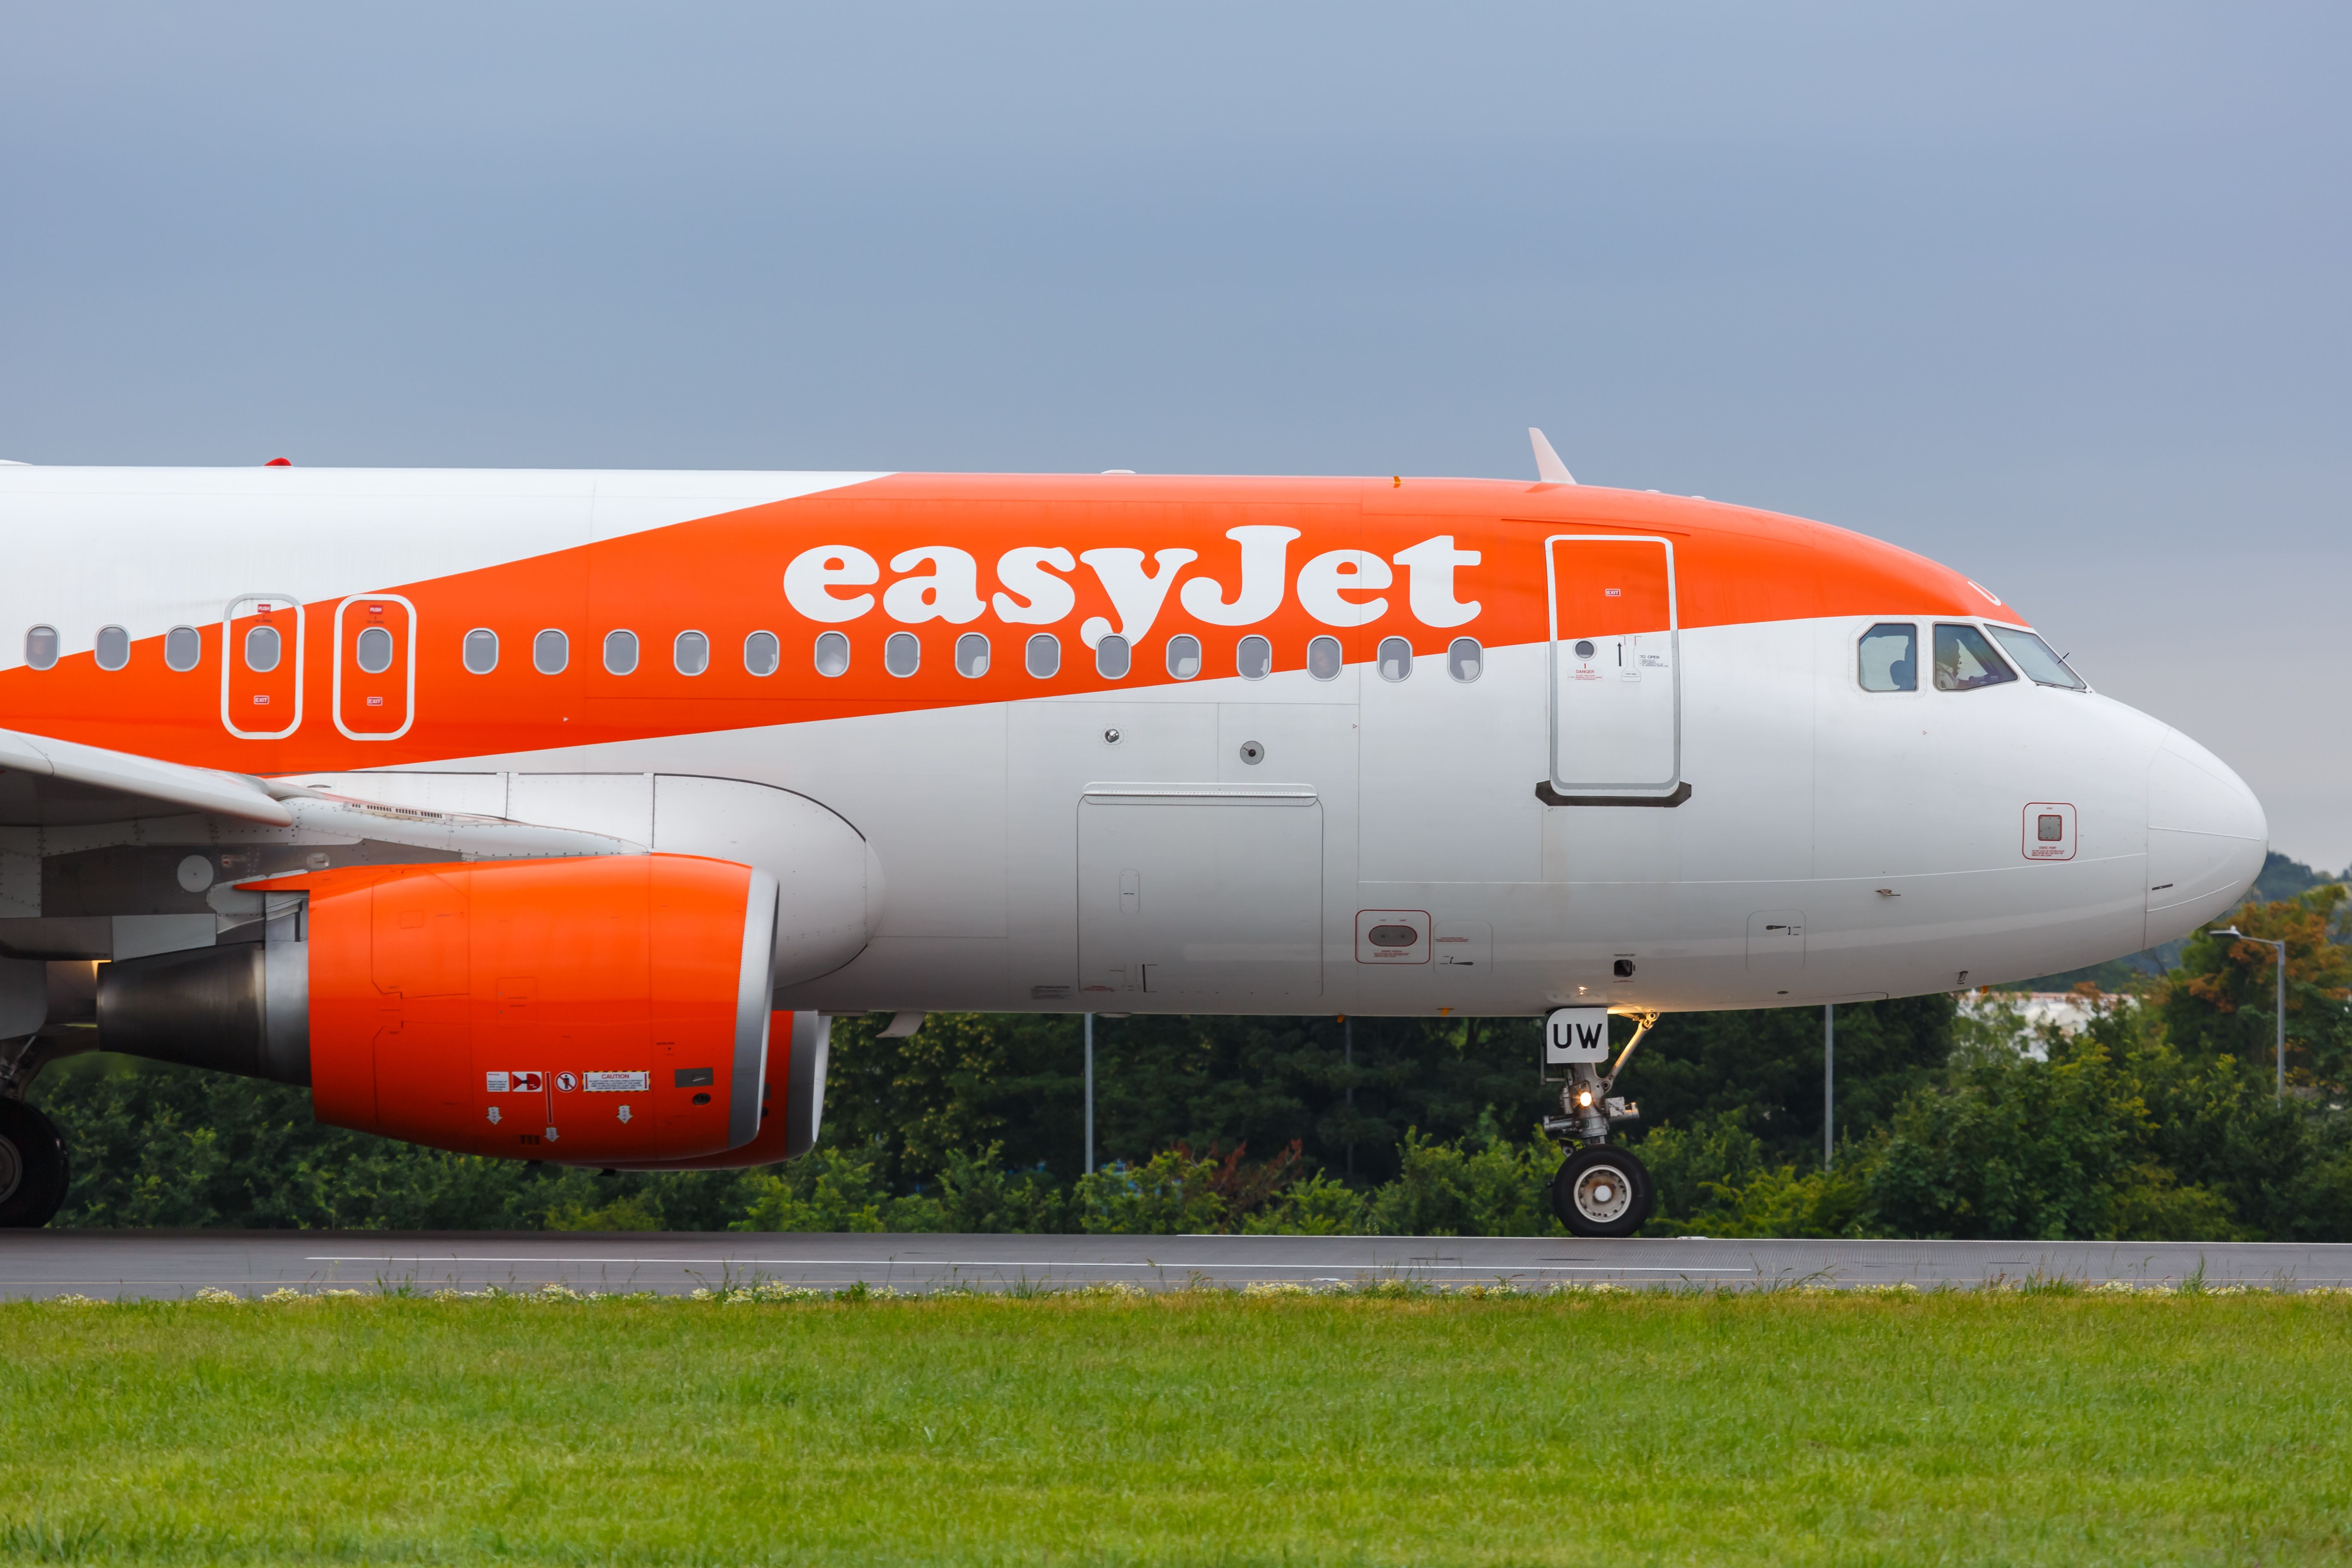 easyjet at Southend Airport